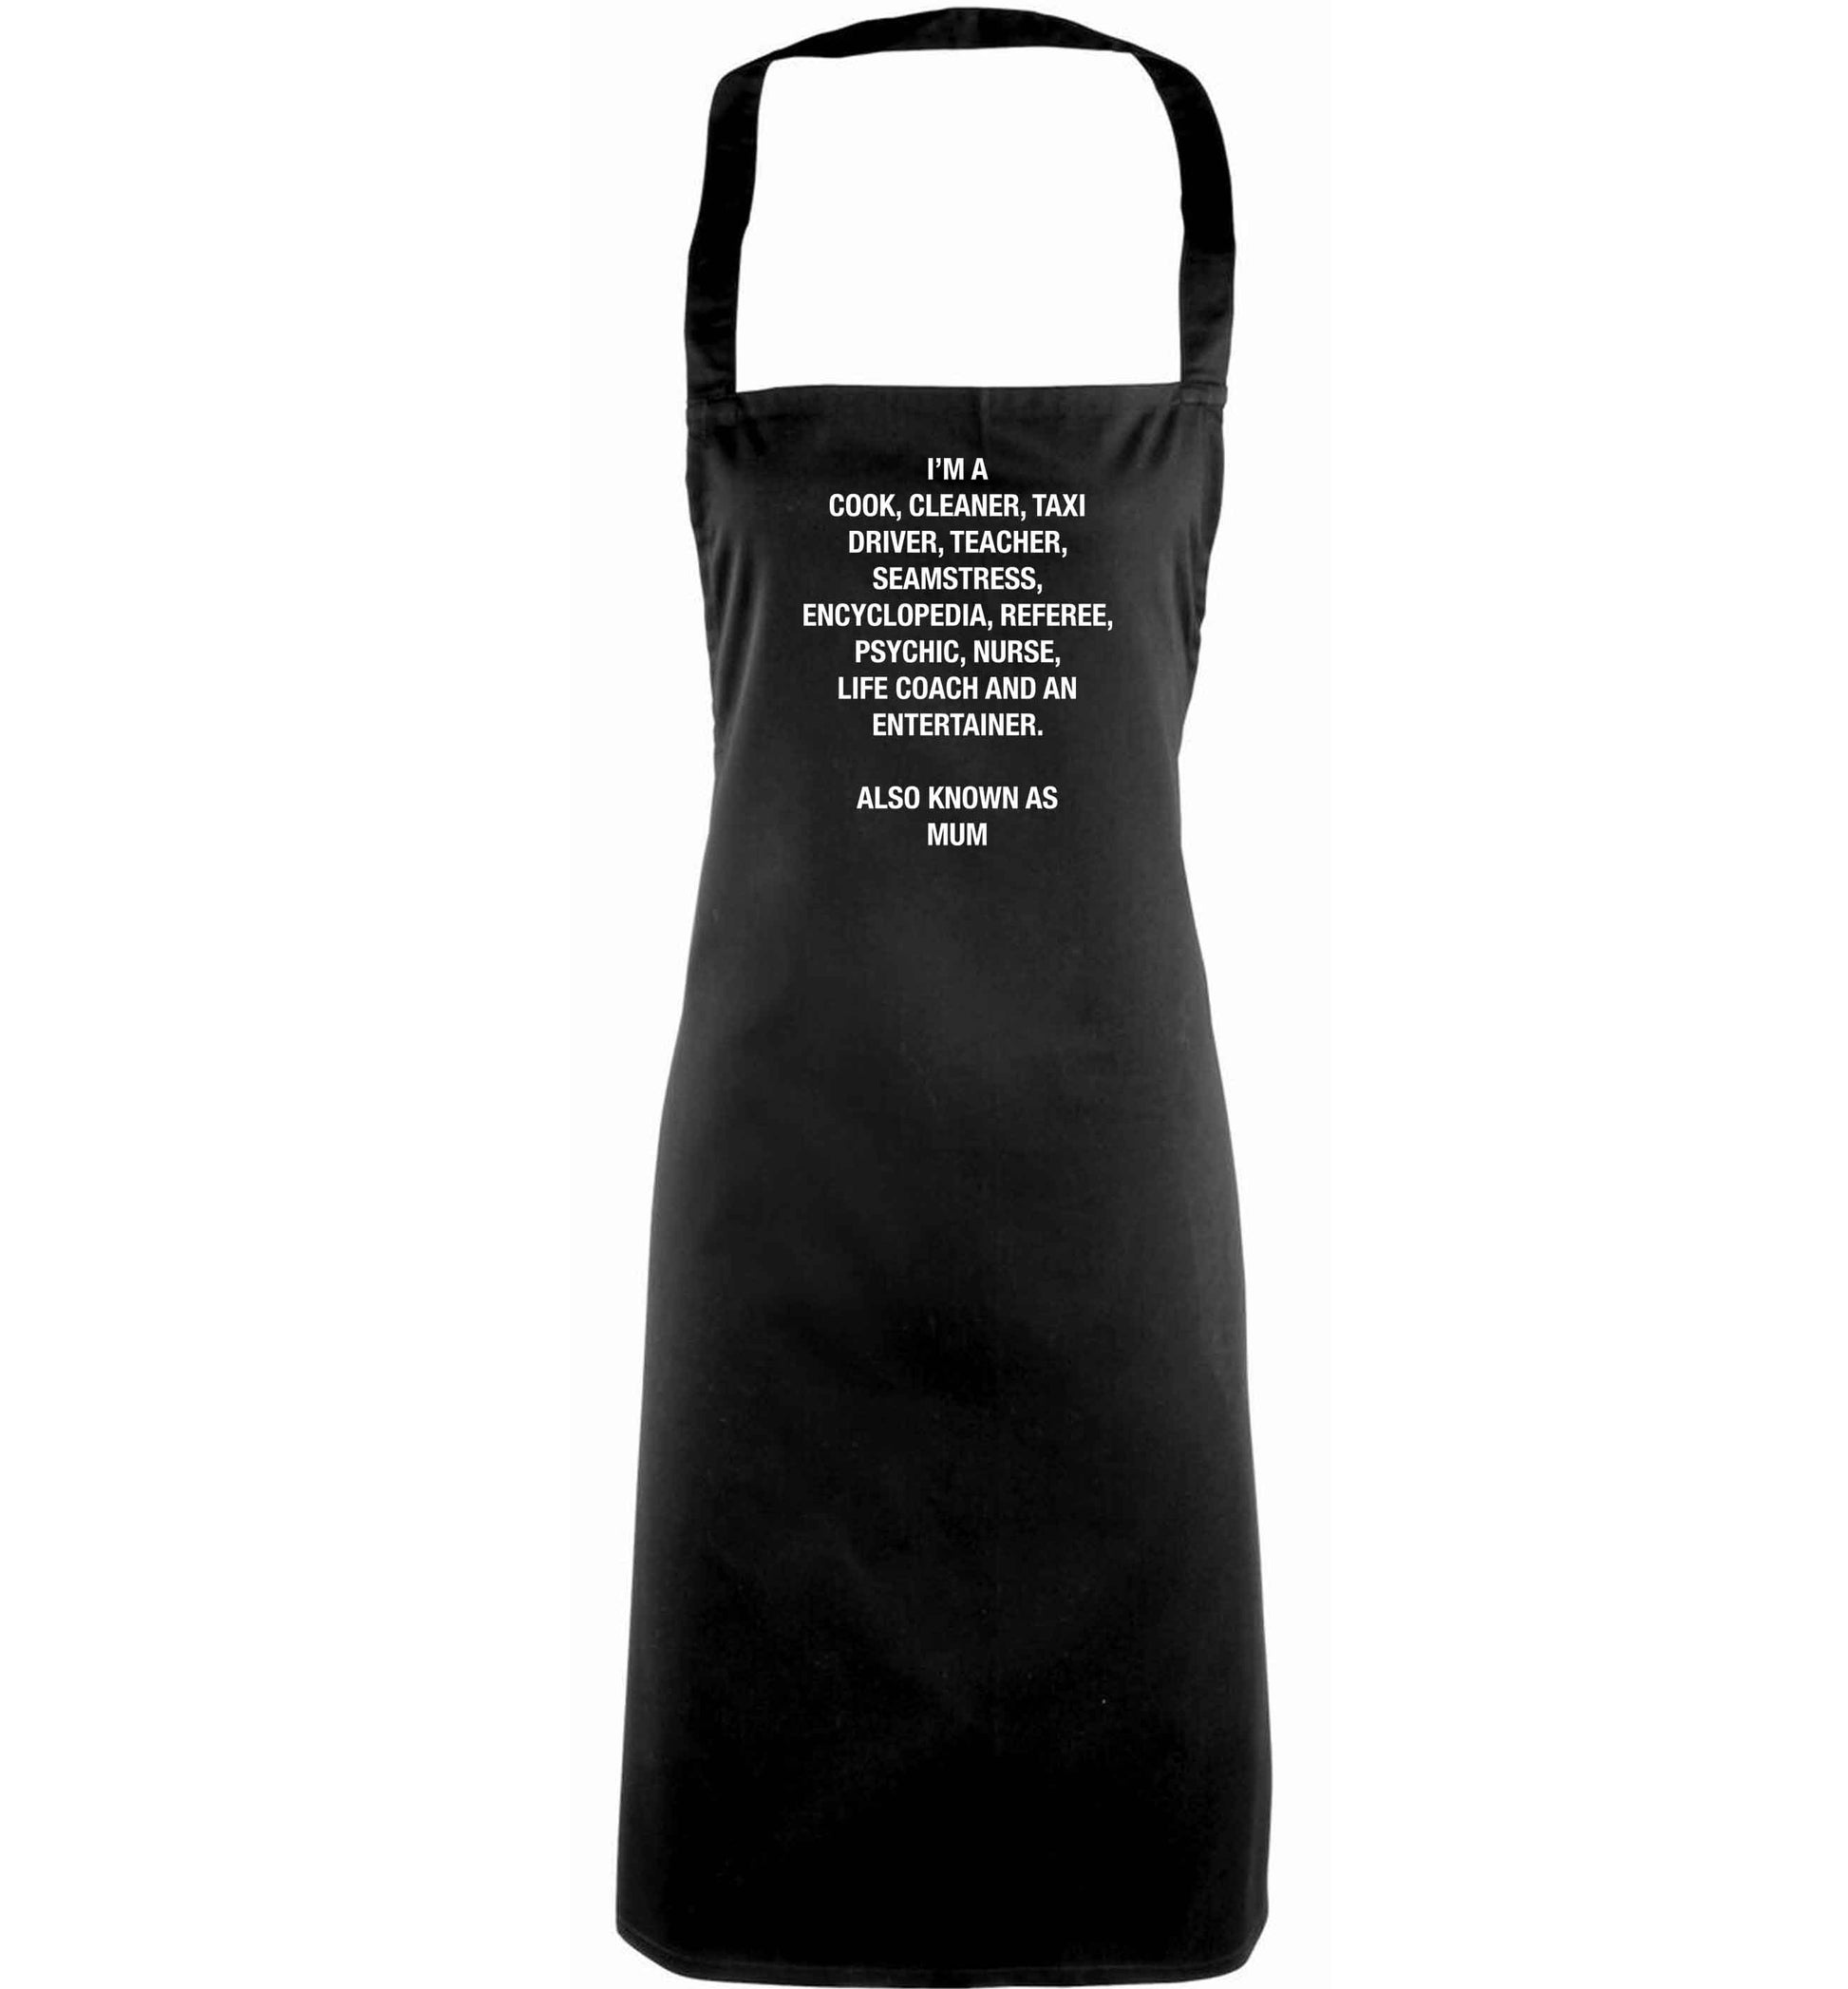 Funny gifts for your mum on mother's dayor her birthday! Mum, cook, cleaner, taxi driver, teacher, seamstress, encyclopedia, referee, psychic, nurse, life coach and entertainer adults black apron